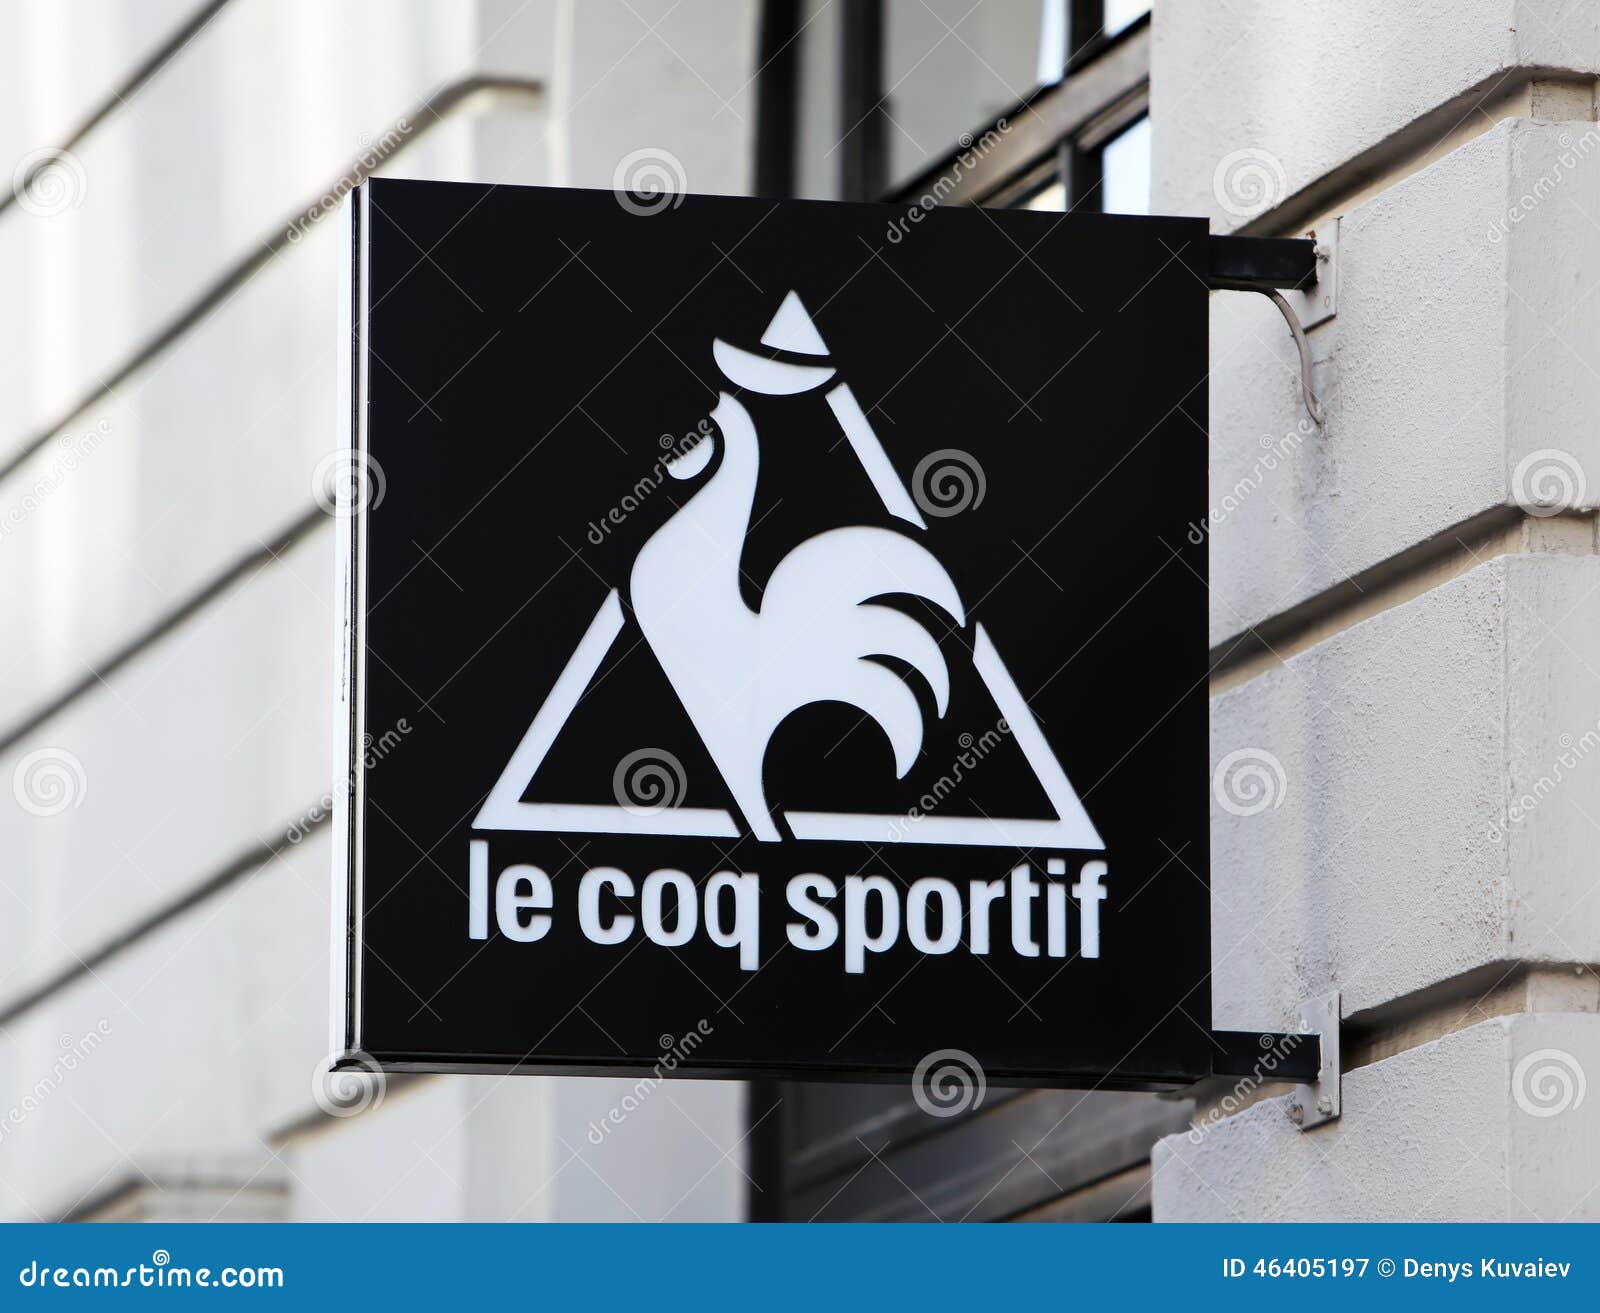 Le Coq Sportif Symbol Over the Entrance of the Store Editorial ...